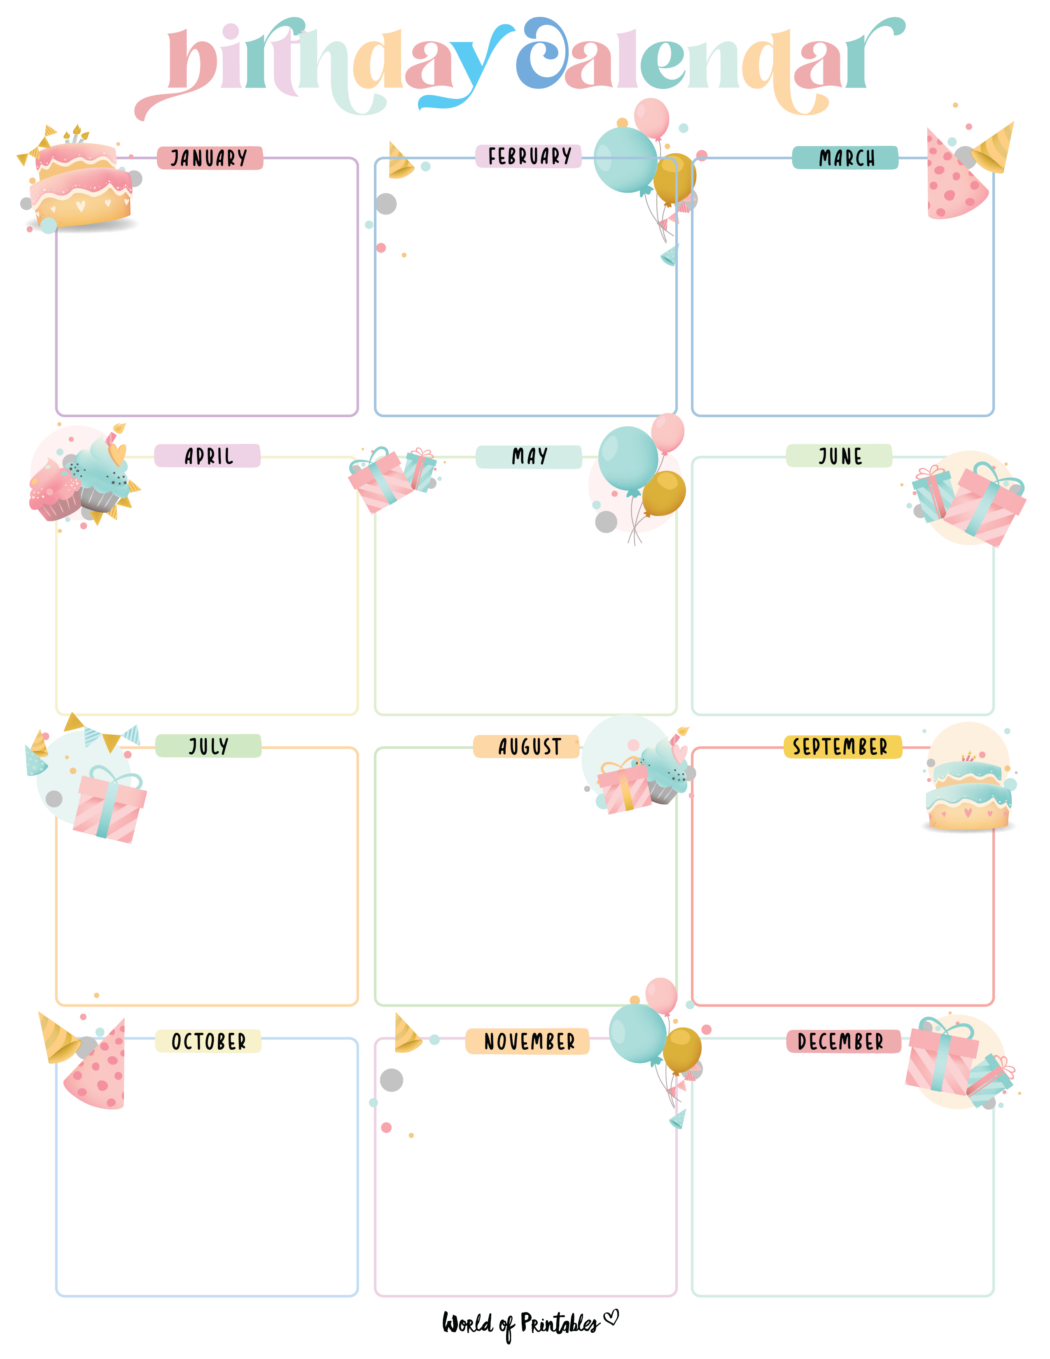 free birthday calendar for the workplace 60